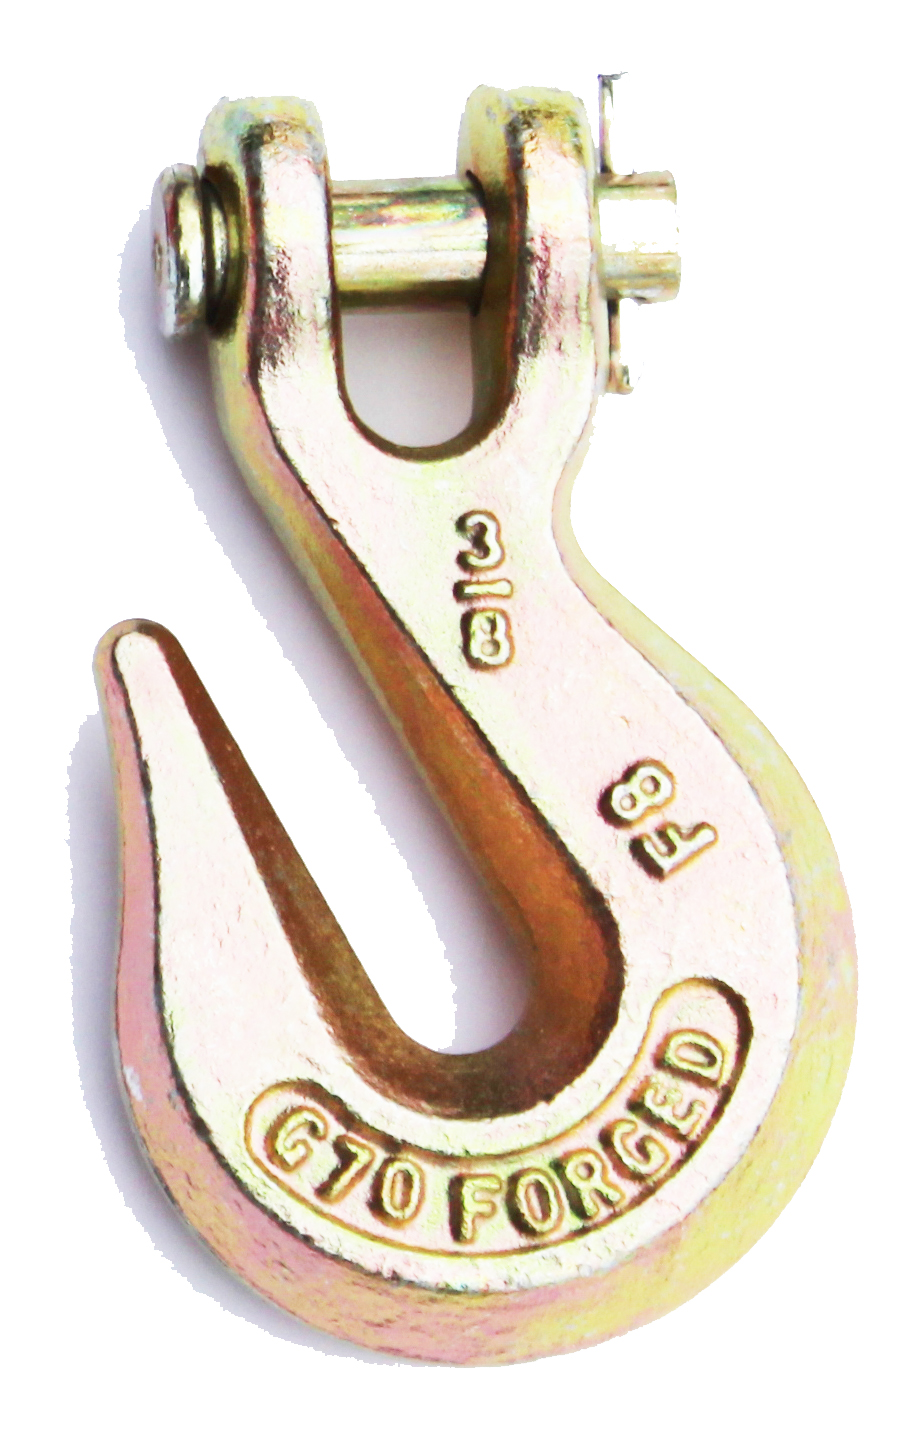 DC Cargo G70 5/16 Chain Hook (Pack of 10) – Heavy Duty Clevis Grab Hook for  5/16